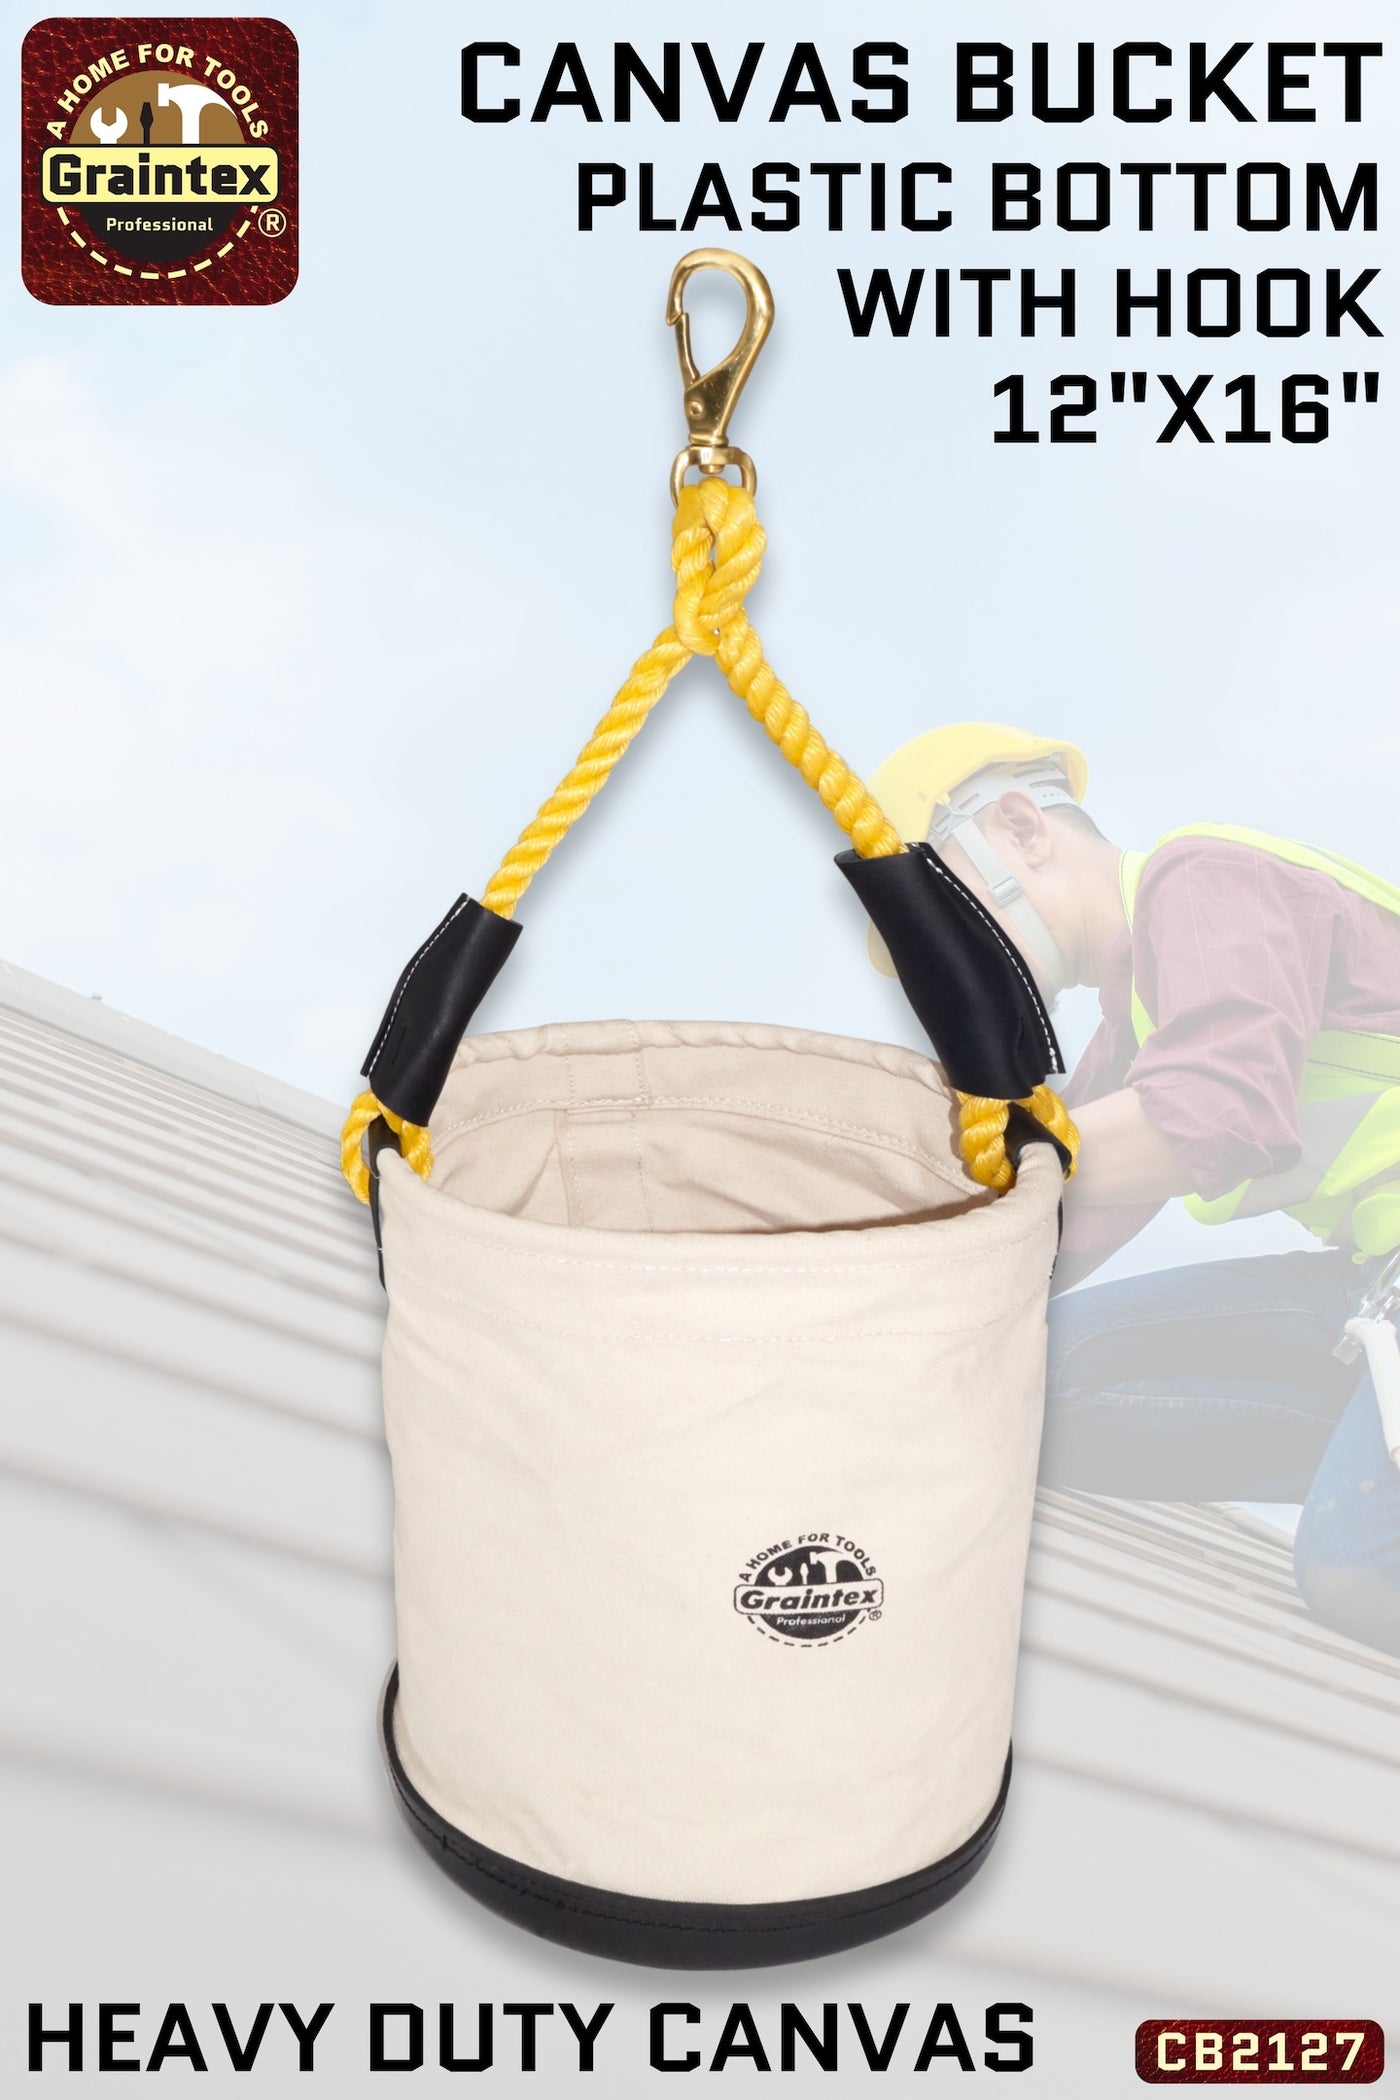 CB2127 :: UTILITY CANVAS BUCKET PLASTIC BOTTOM 12”X16” ROPE HANDLE WITH SWIVEL SNAP HOOK